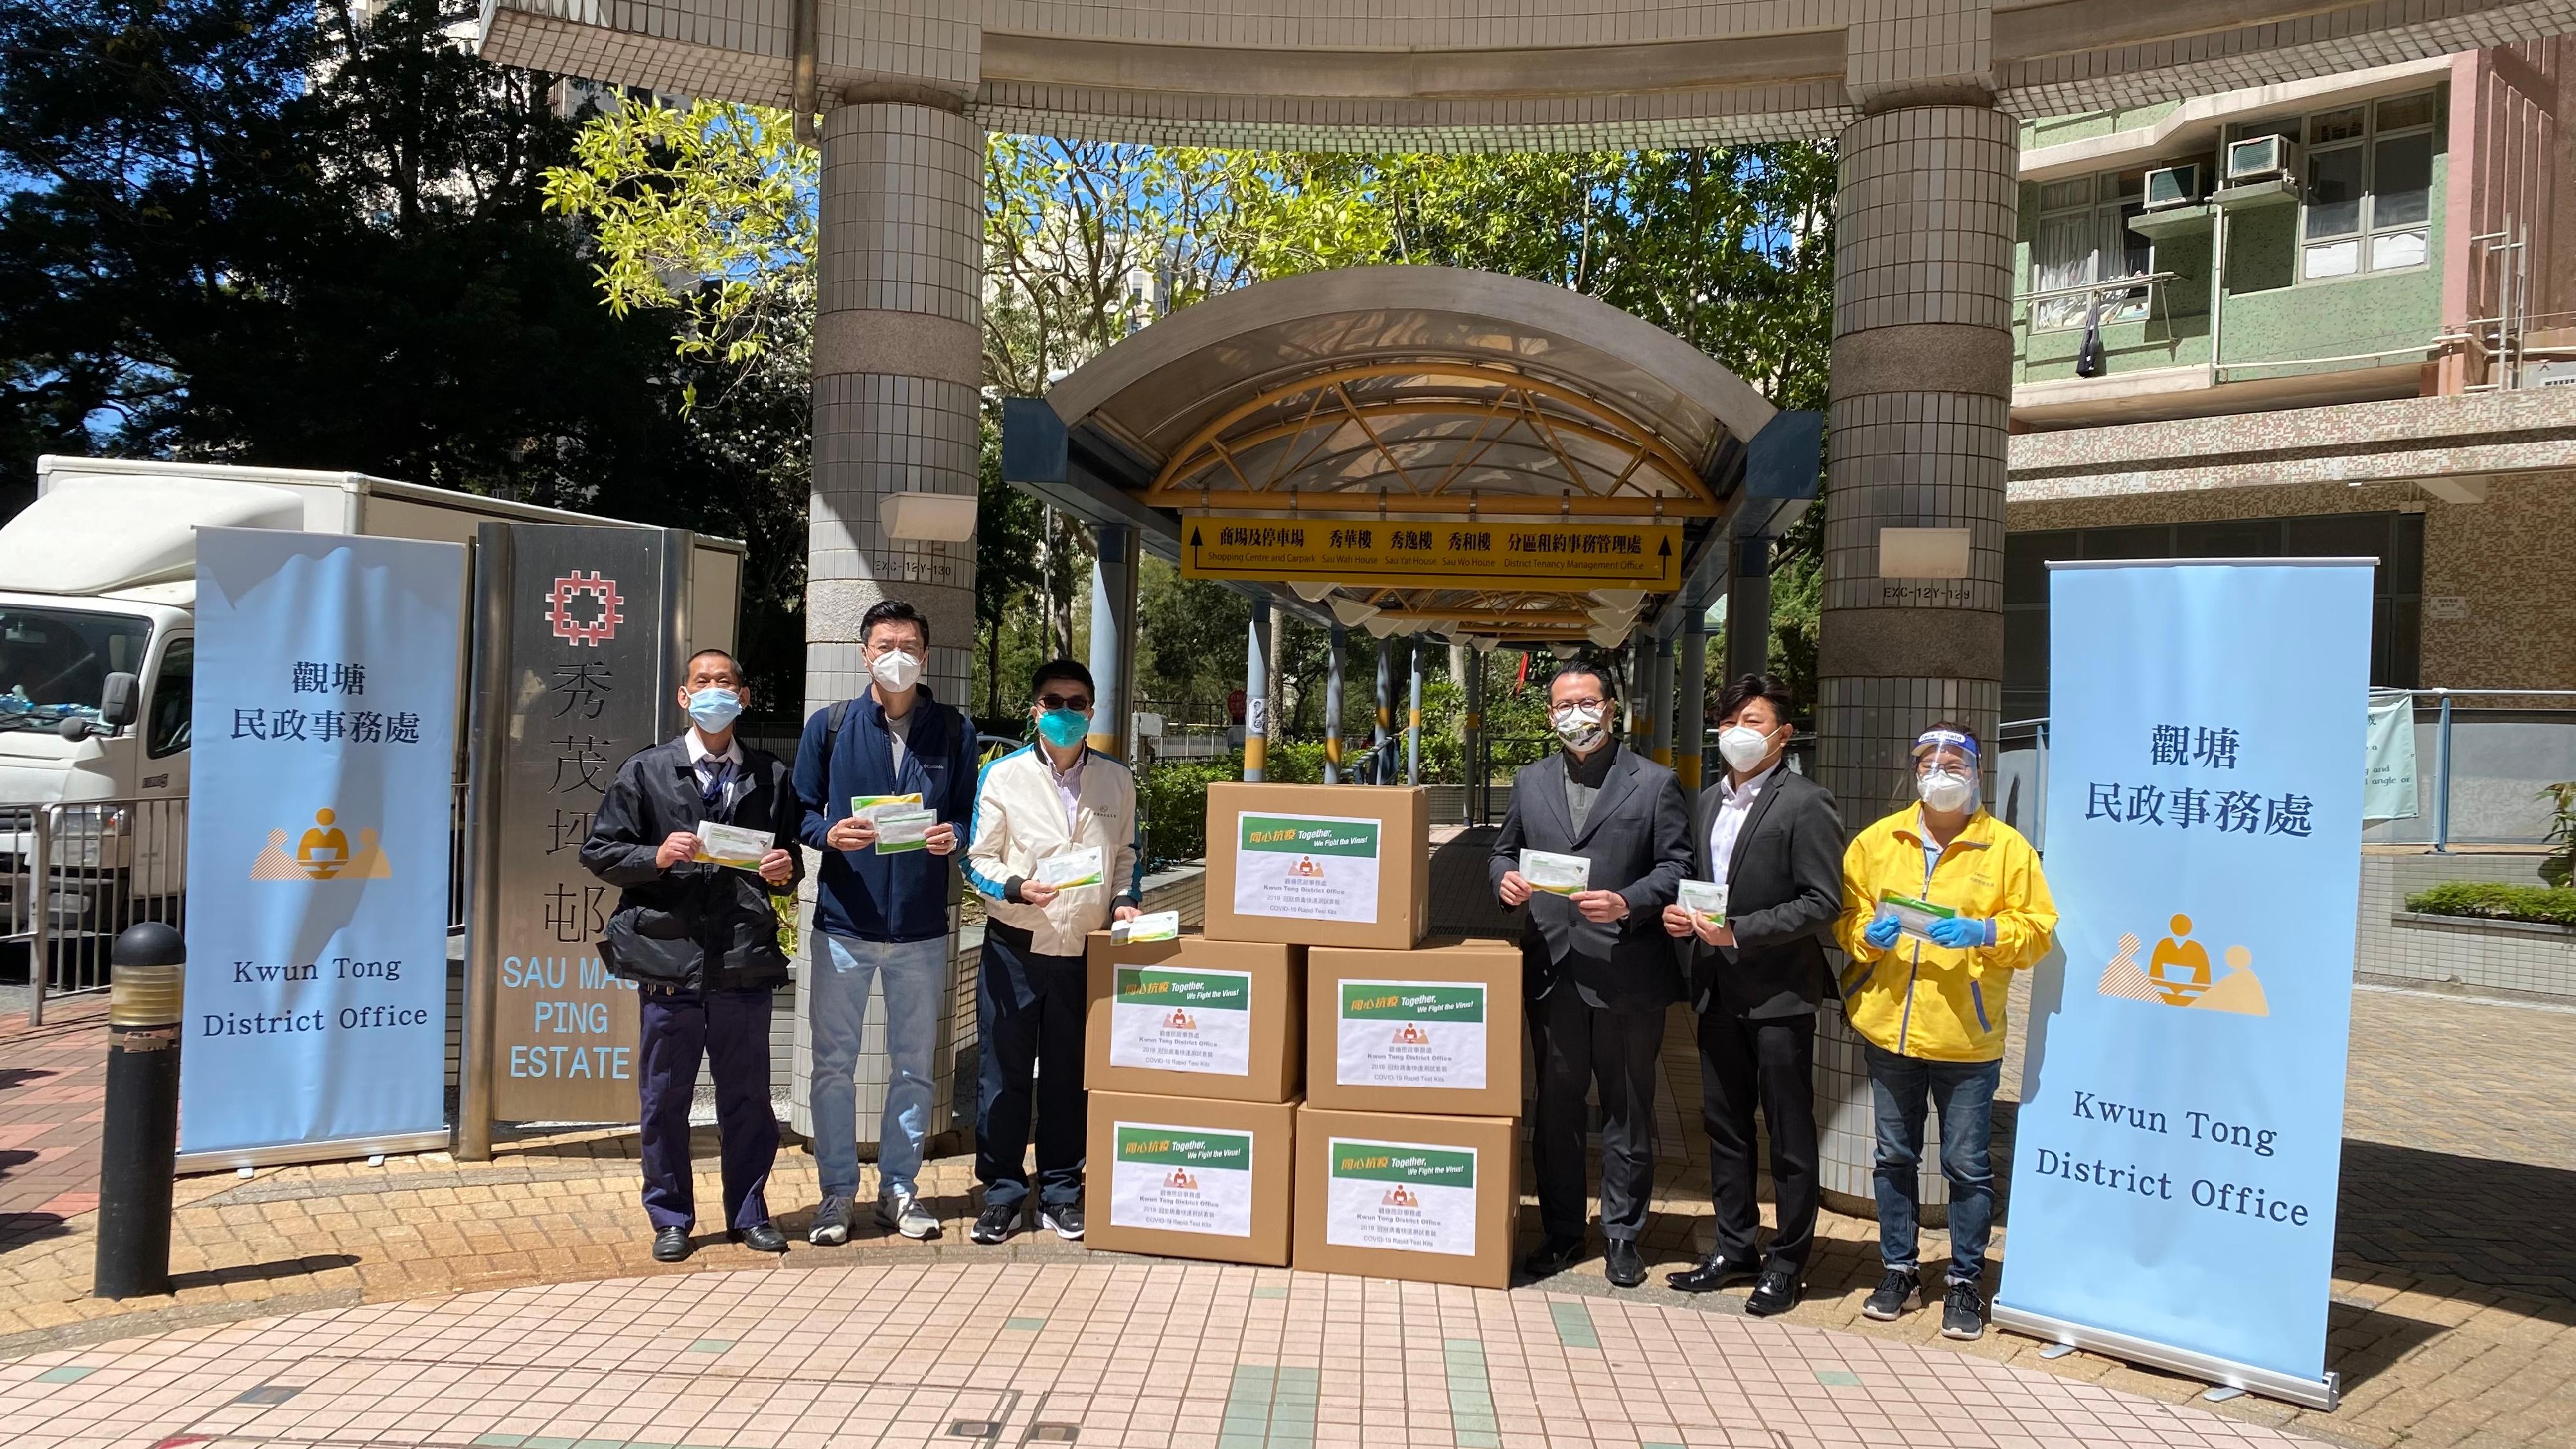 The Kwun Tong District Office today (March 9) distributed COVID-19 rapid test kits to households, cleansing workers and property management staff living and working in Sau Mau Ping Estate for voluntary testing through the property management company.